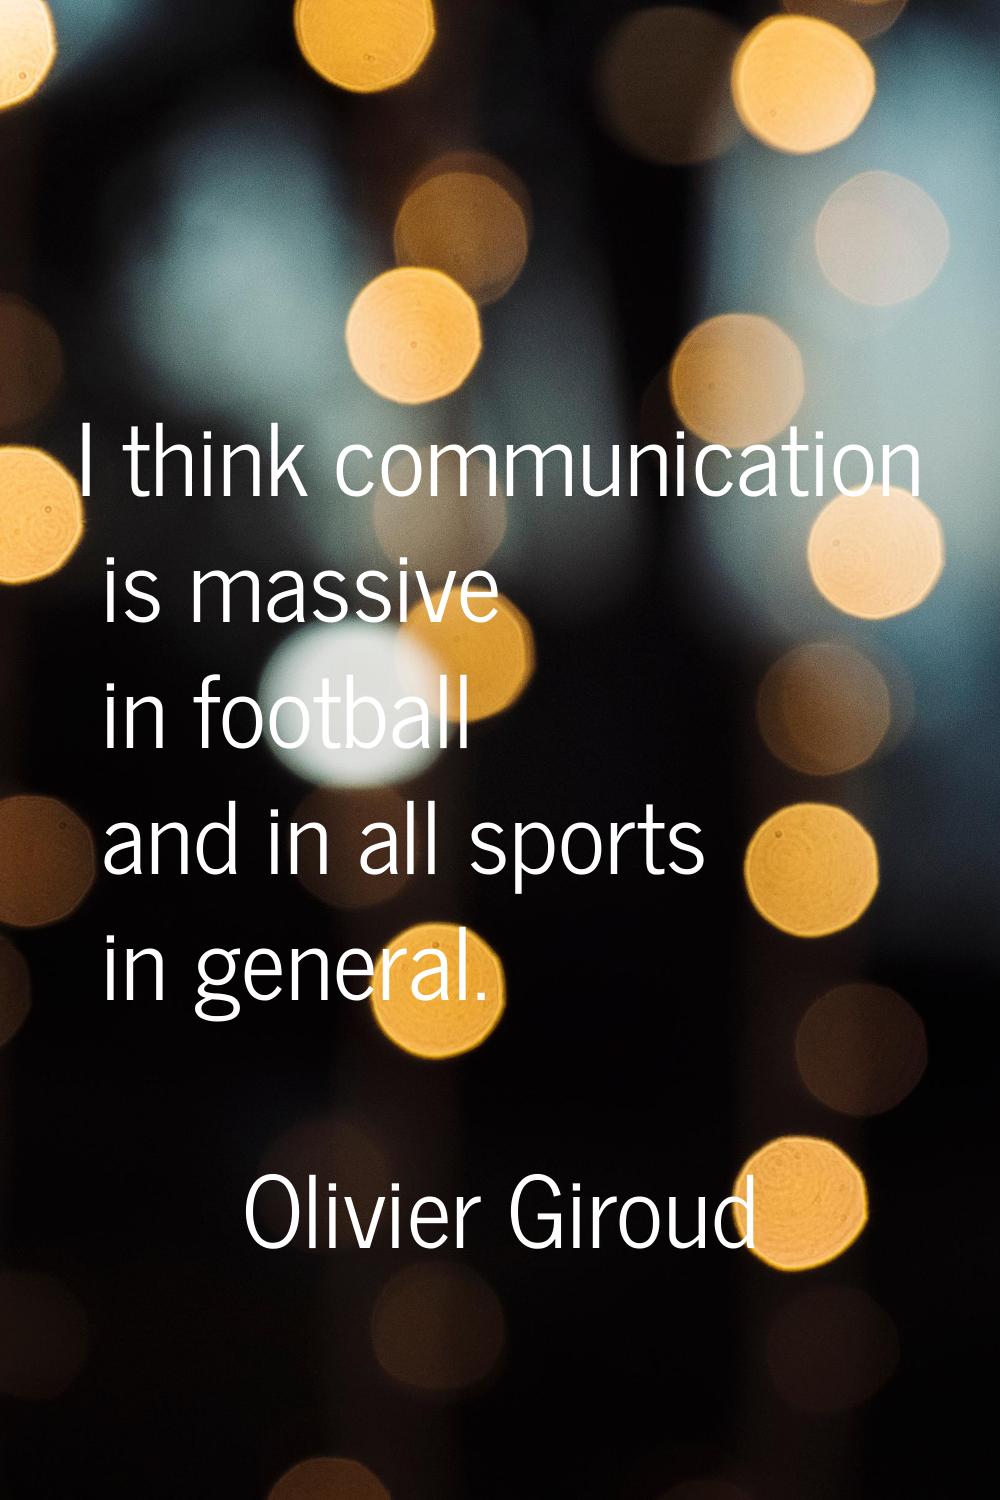 I think communication is massive in football and in all sports in general.